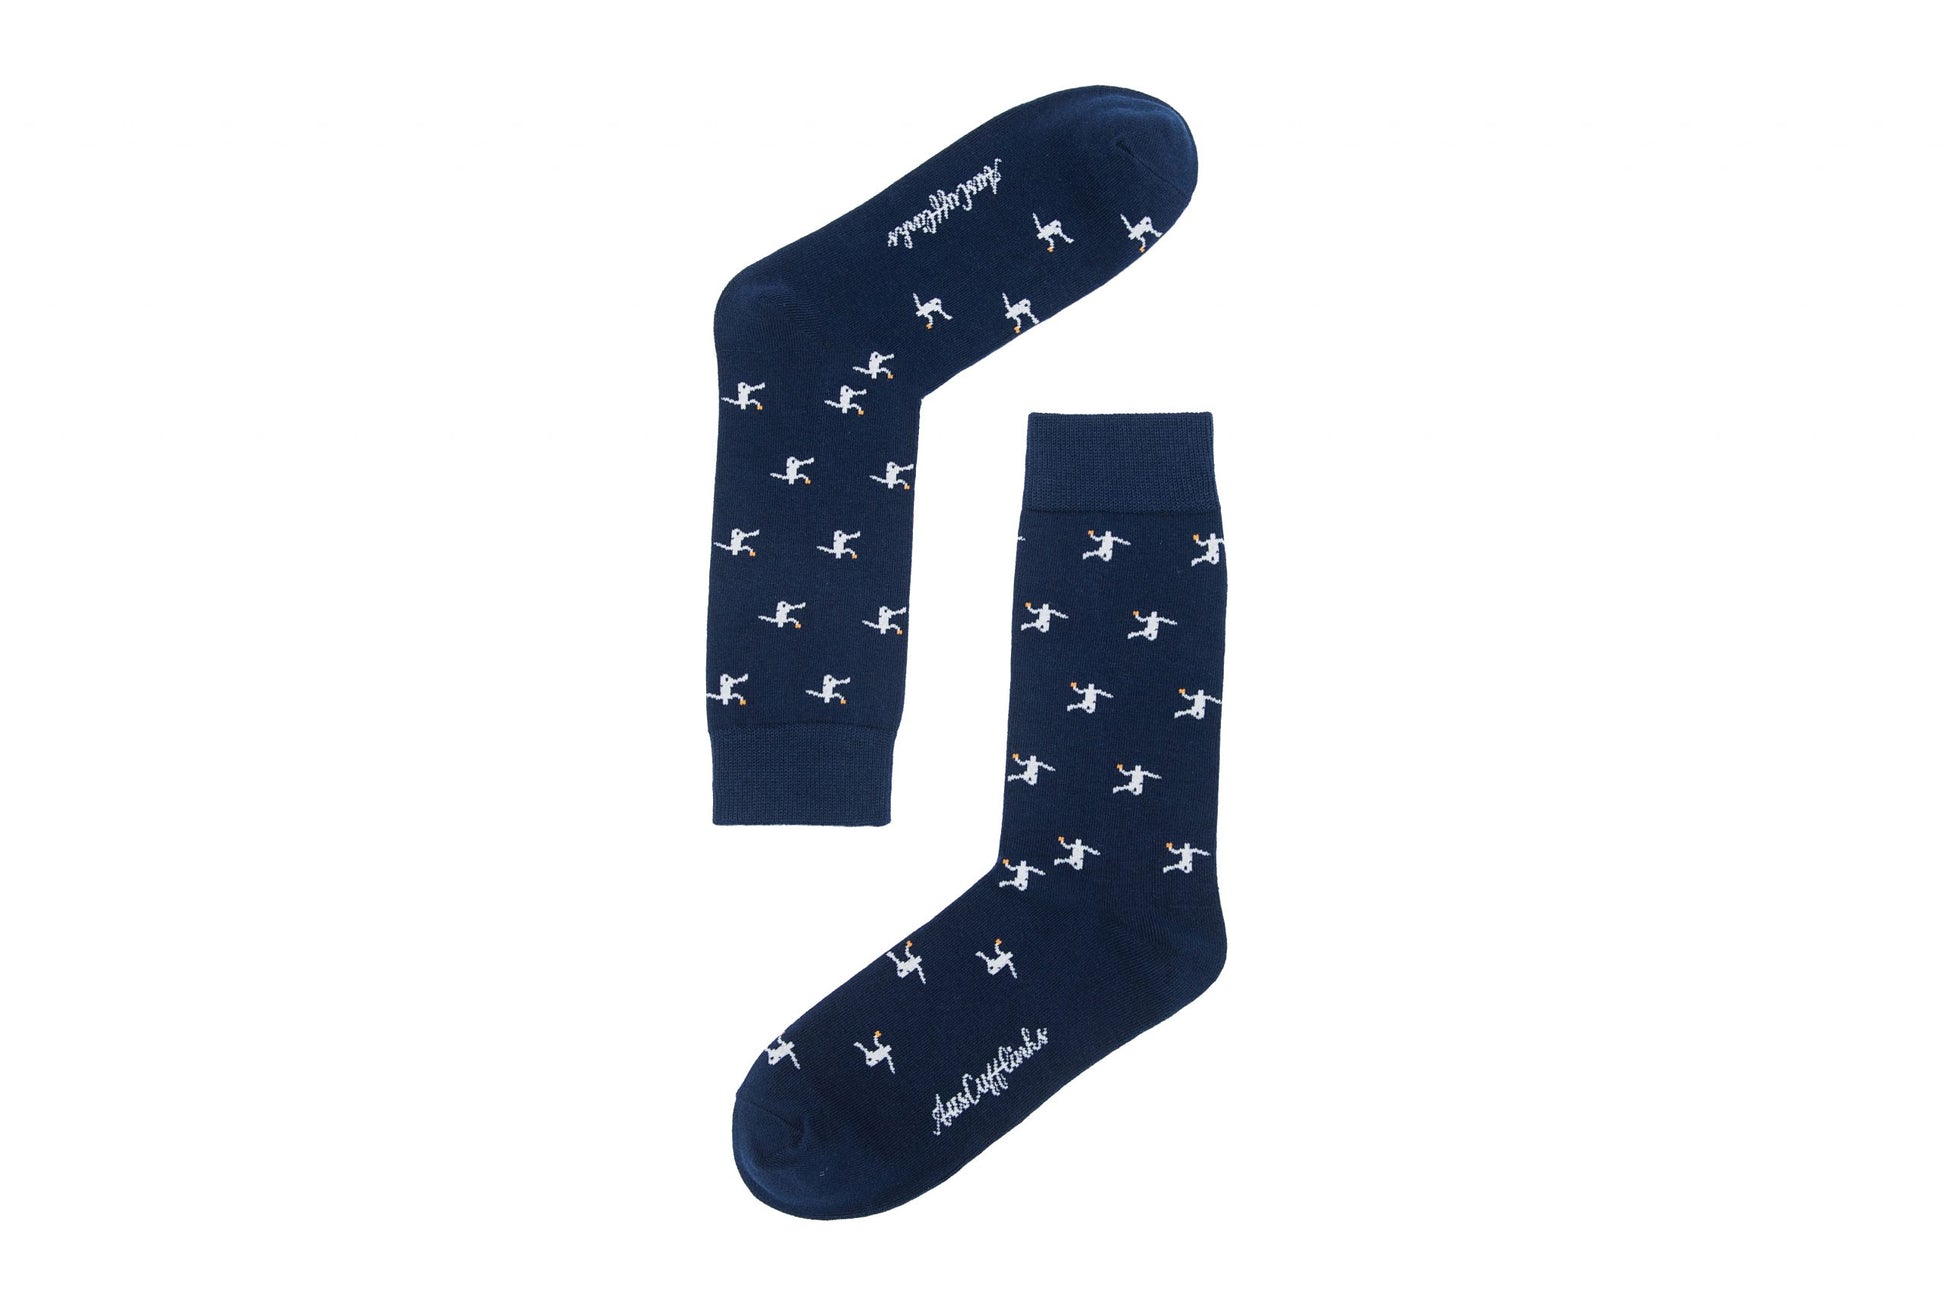 A pair of Basketball Dunk Socks with white crosses on them.